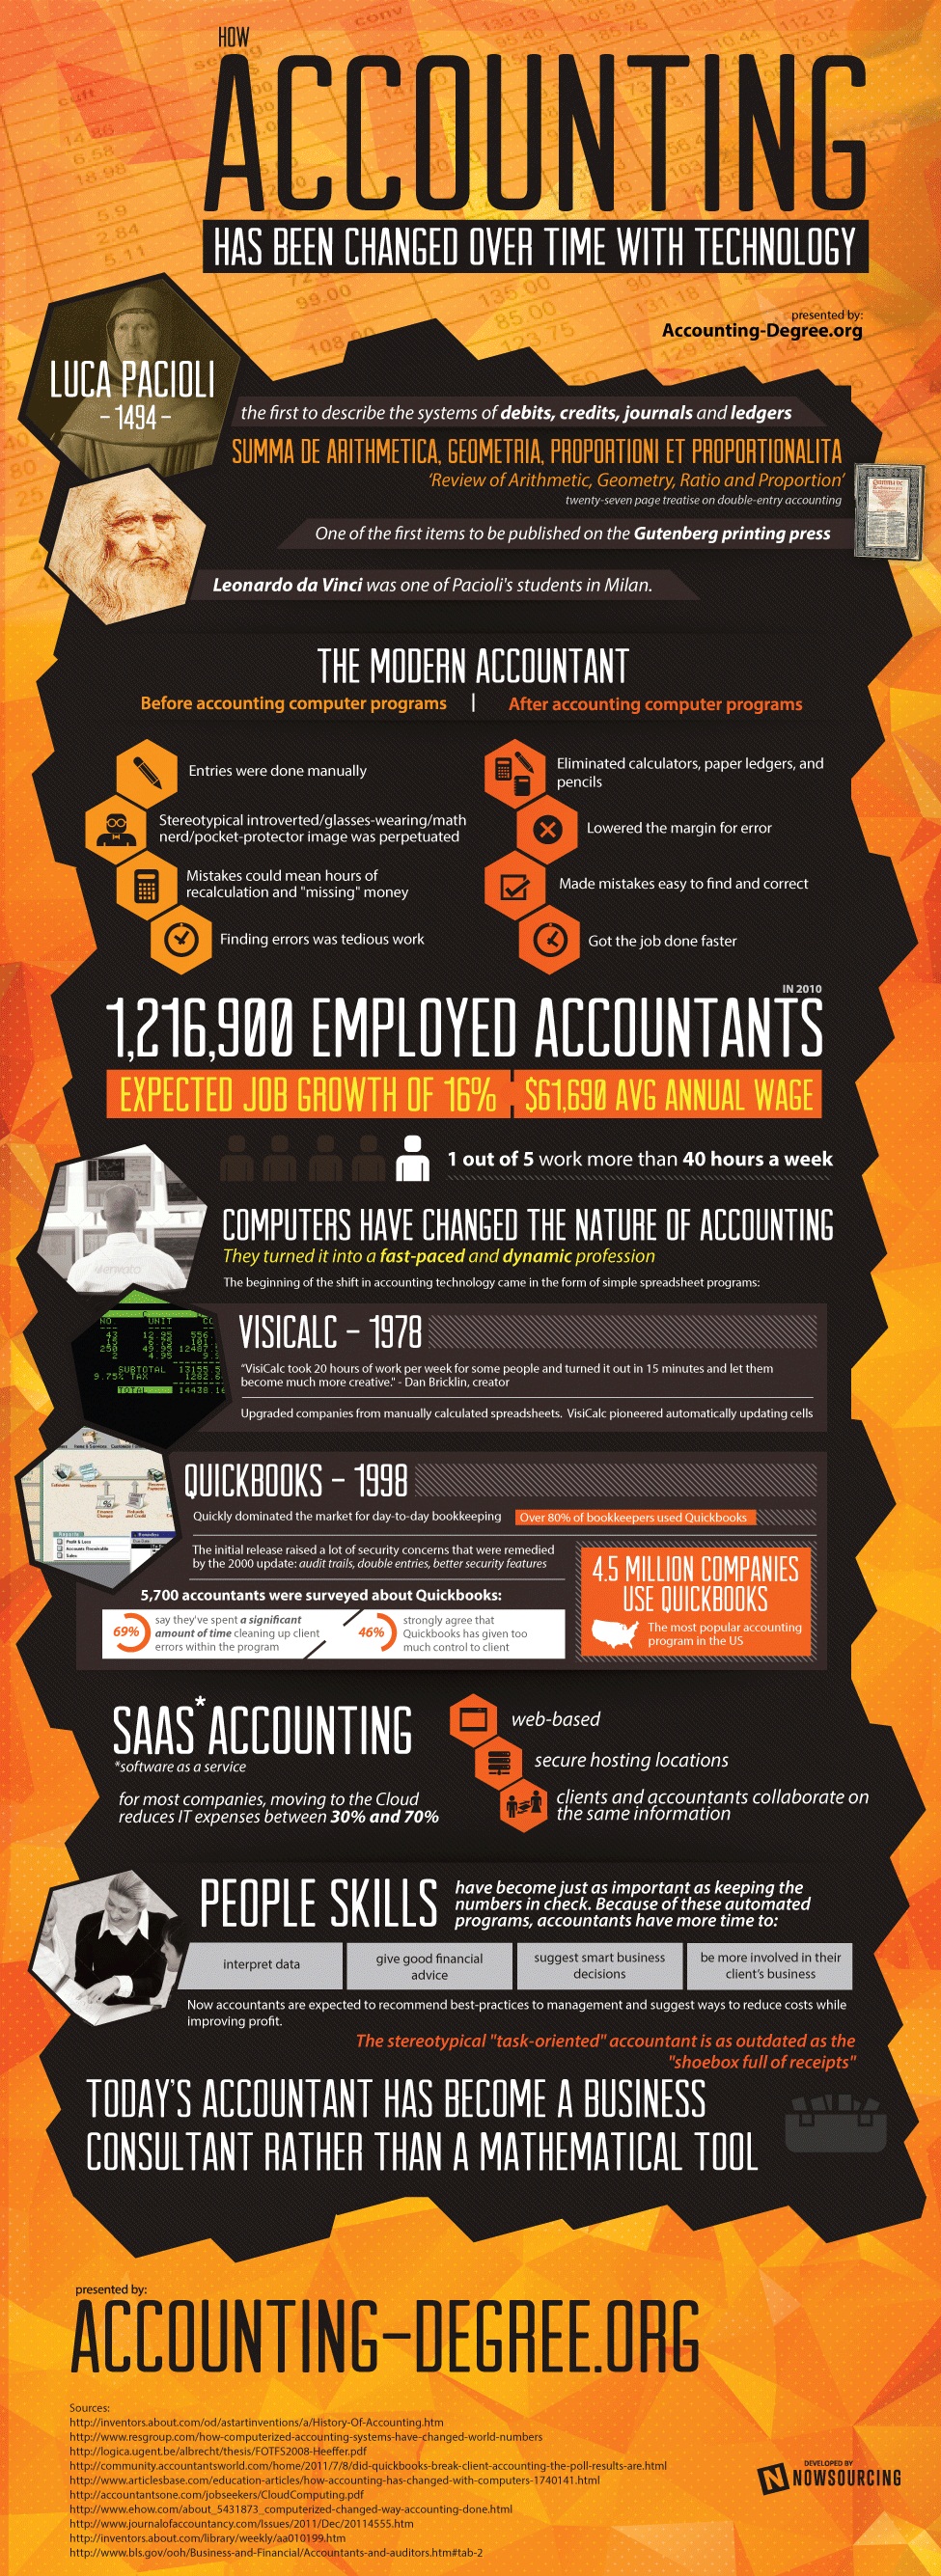 Transformation of Accounting in Recent Years